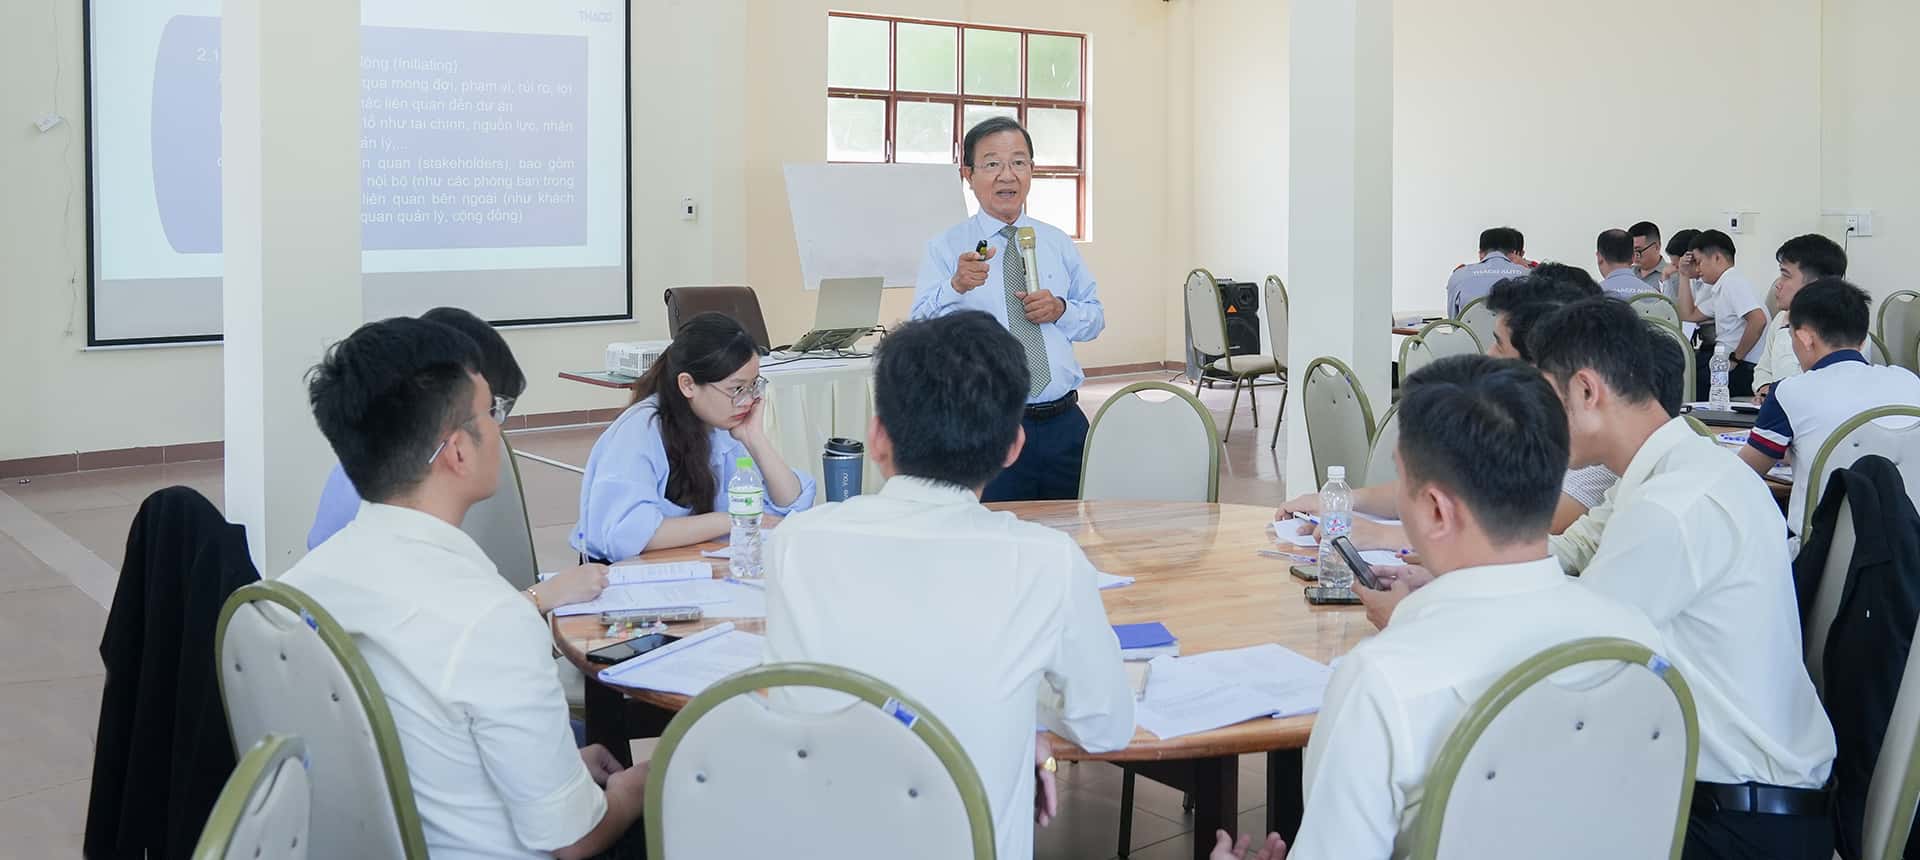 Nearly 200 employees who are managers and specialists from companies and units at THACO Chu Lai participated in the training course.